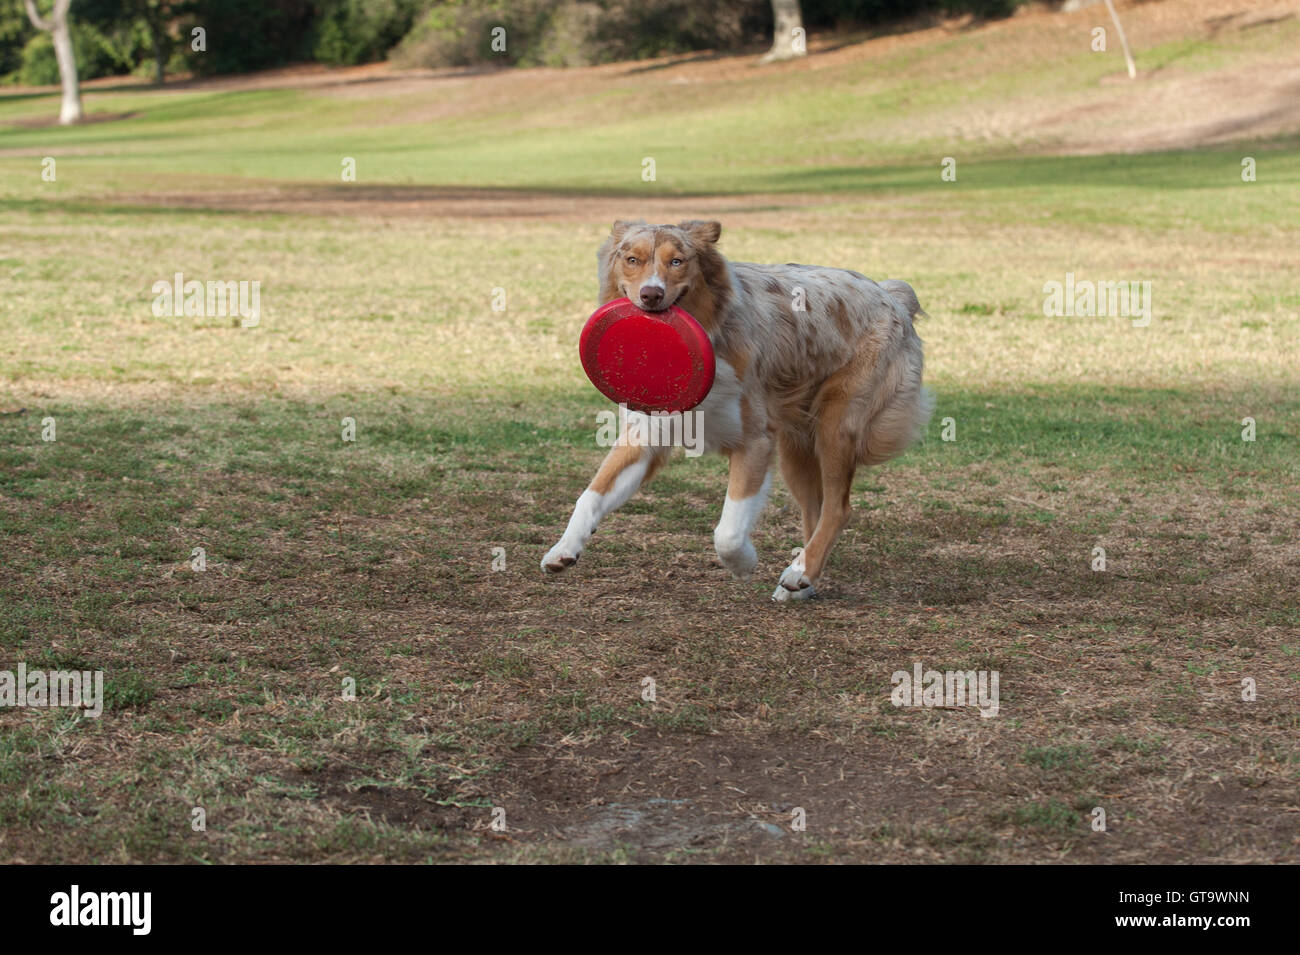 Red Merle Australian Shepard dog running in grass at park while looking right. Stock Photo